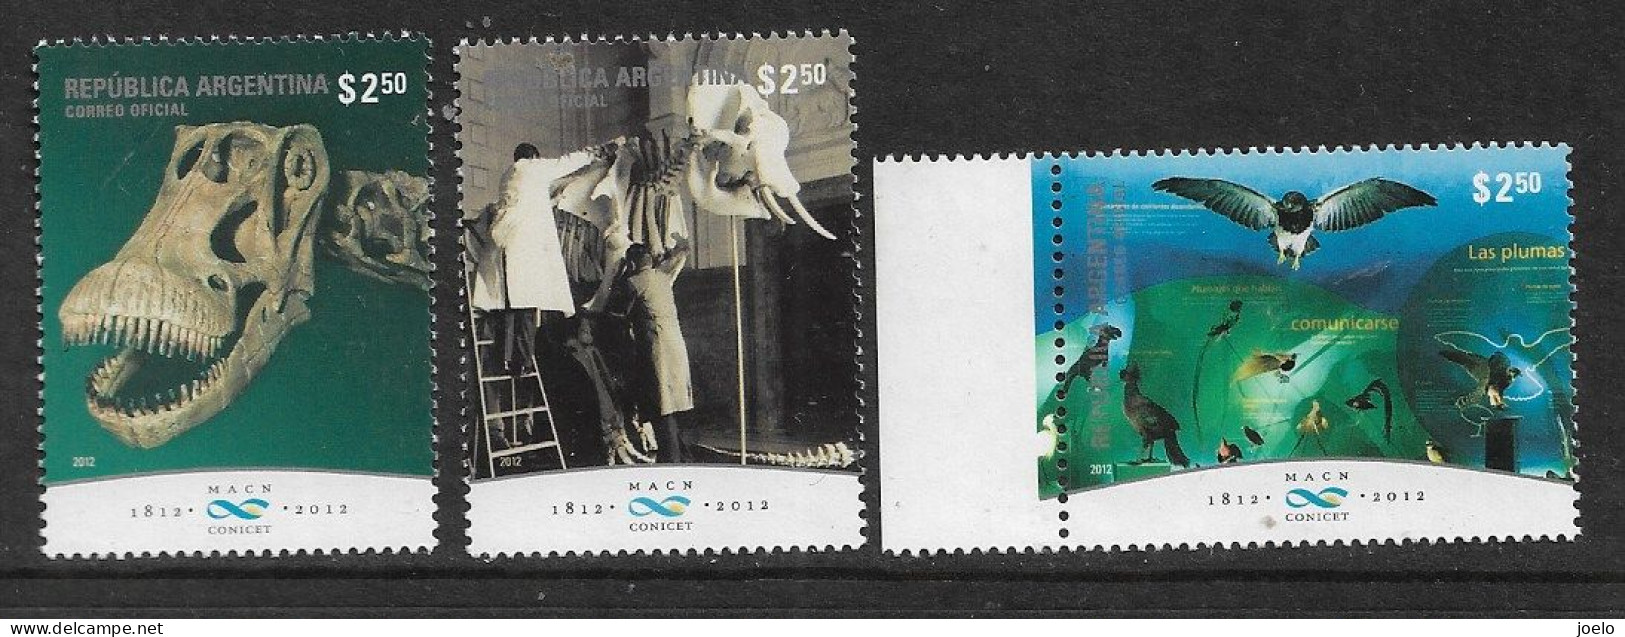 ARGENTINA 2012 BICENTENARY NATURAL HISTORY MUSEUM PART SET MNH - Unused Stamps